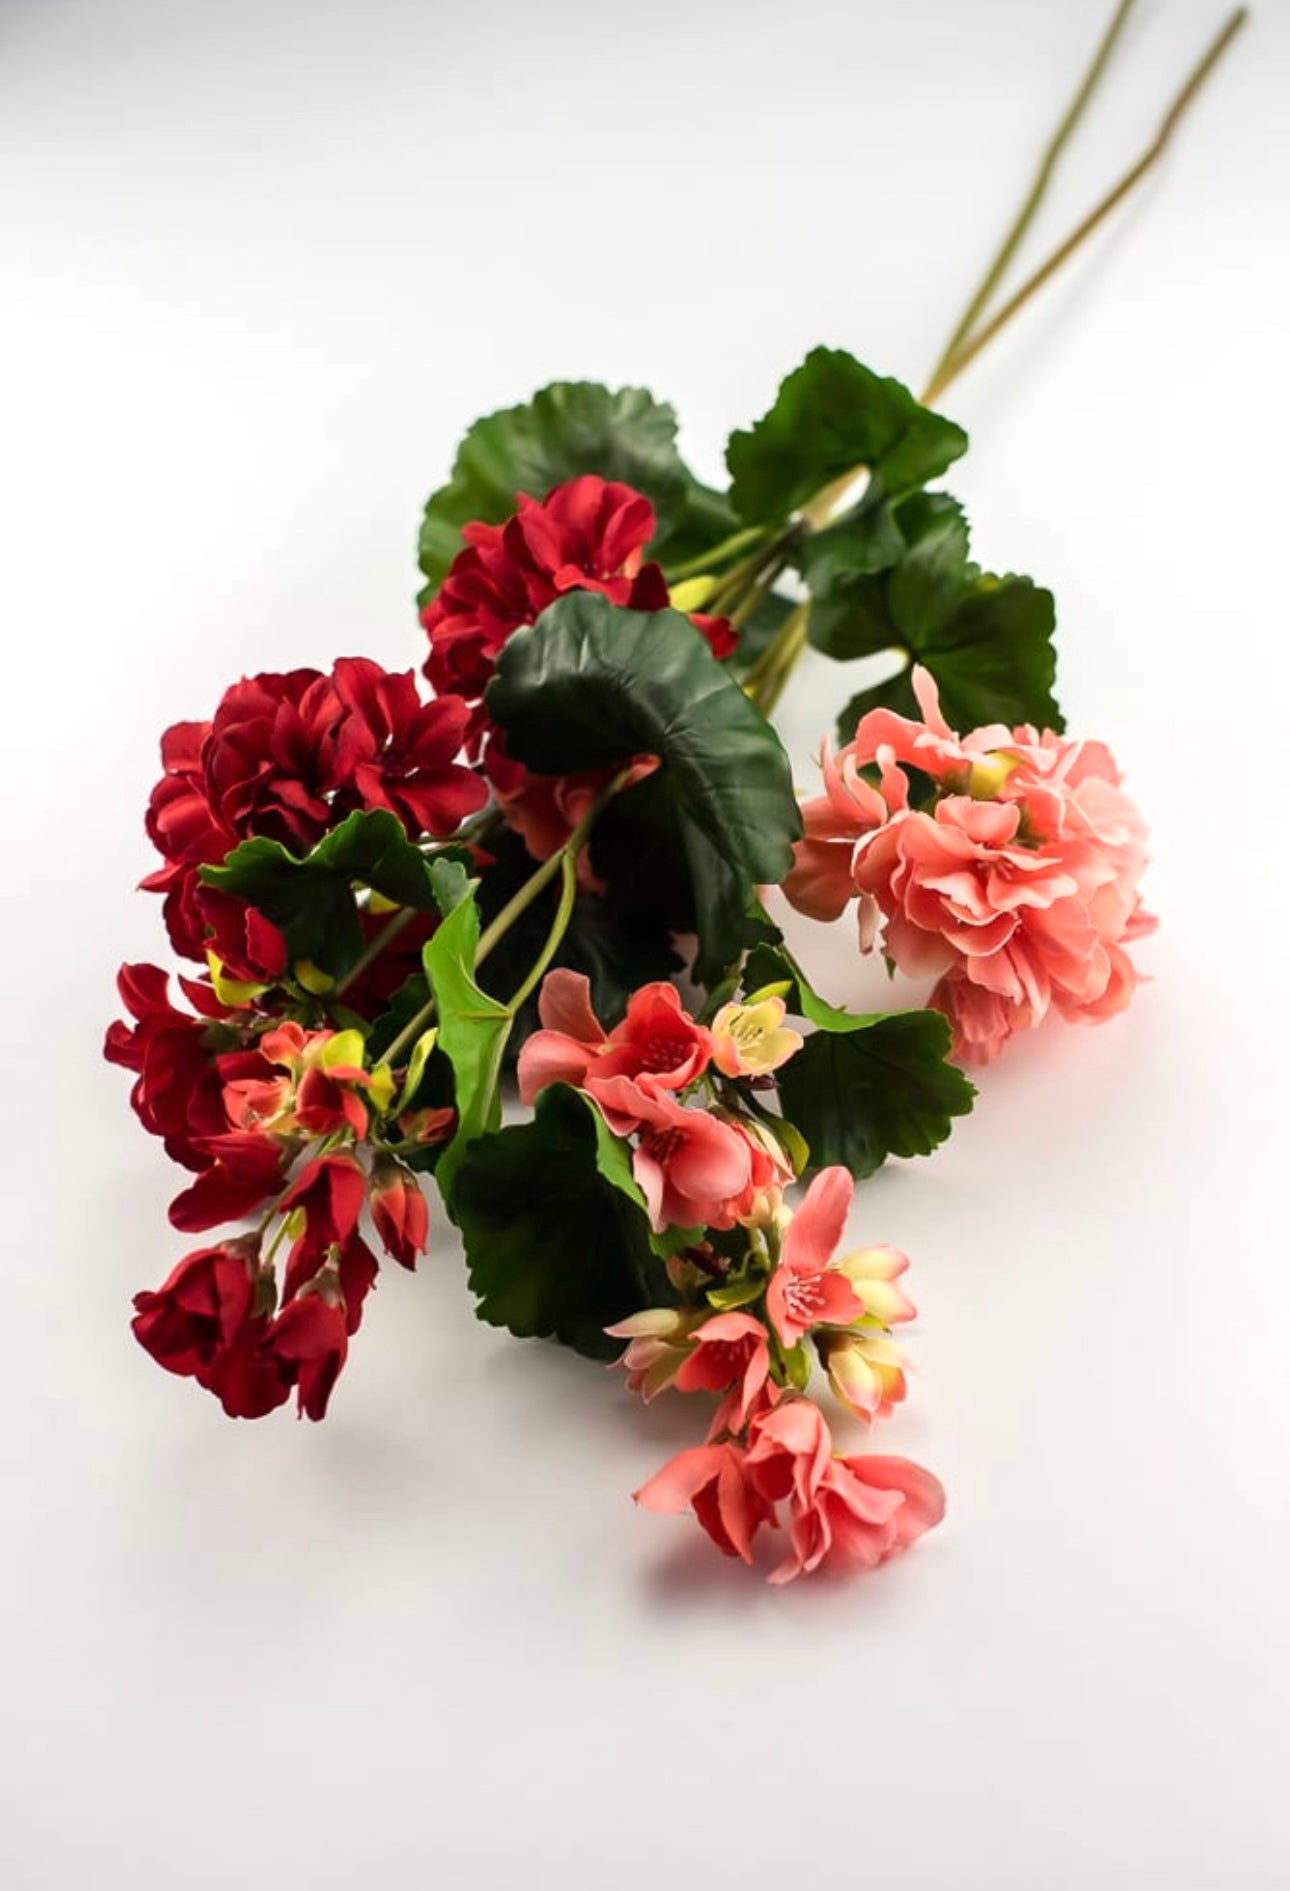 Red Geranium spray, real touch - Greenery Marketartificial flowers2285221RD